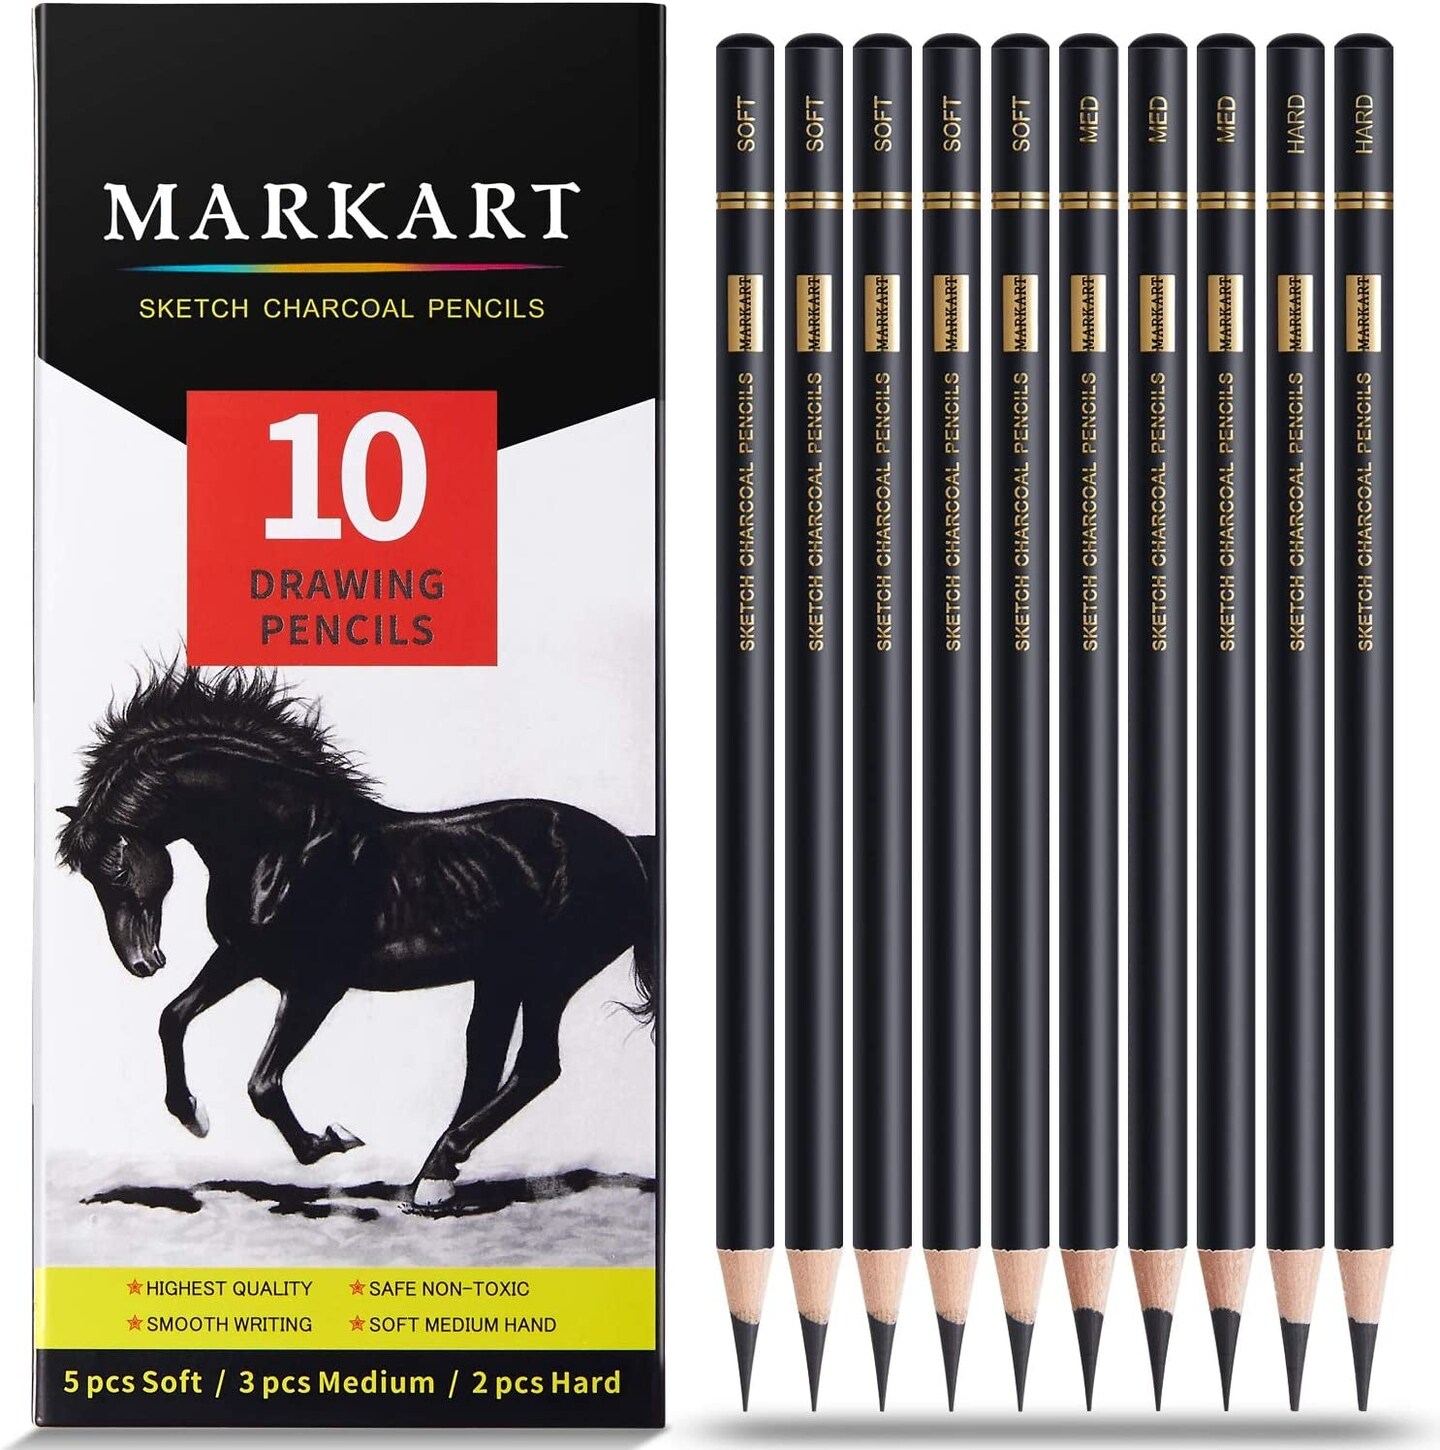 Professional Charcoal Pencils Drawing Set - 10 Pieces Soft Medium and Hard Charcoal  Pencils for Drawing, Sketching, Shading